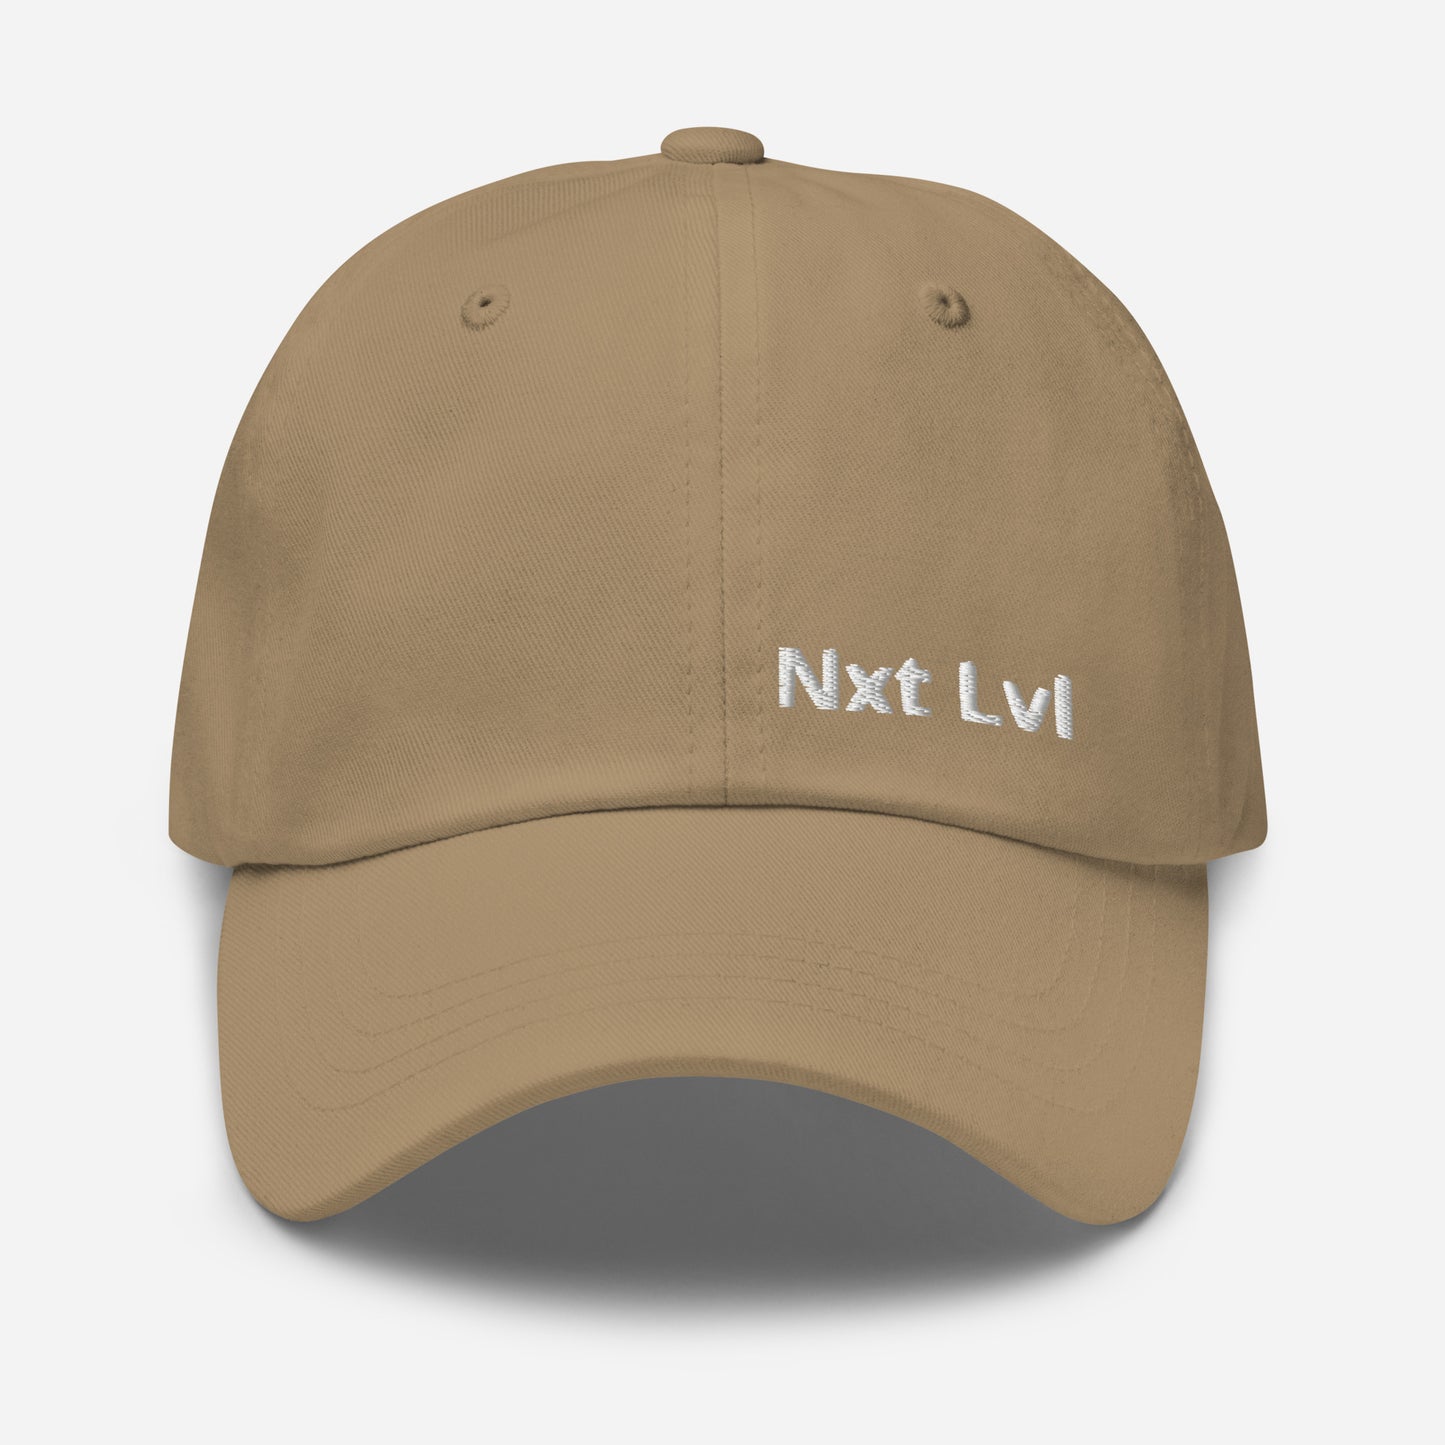 Next Level Dad or Mom hat